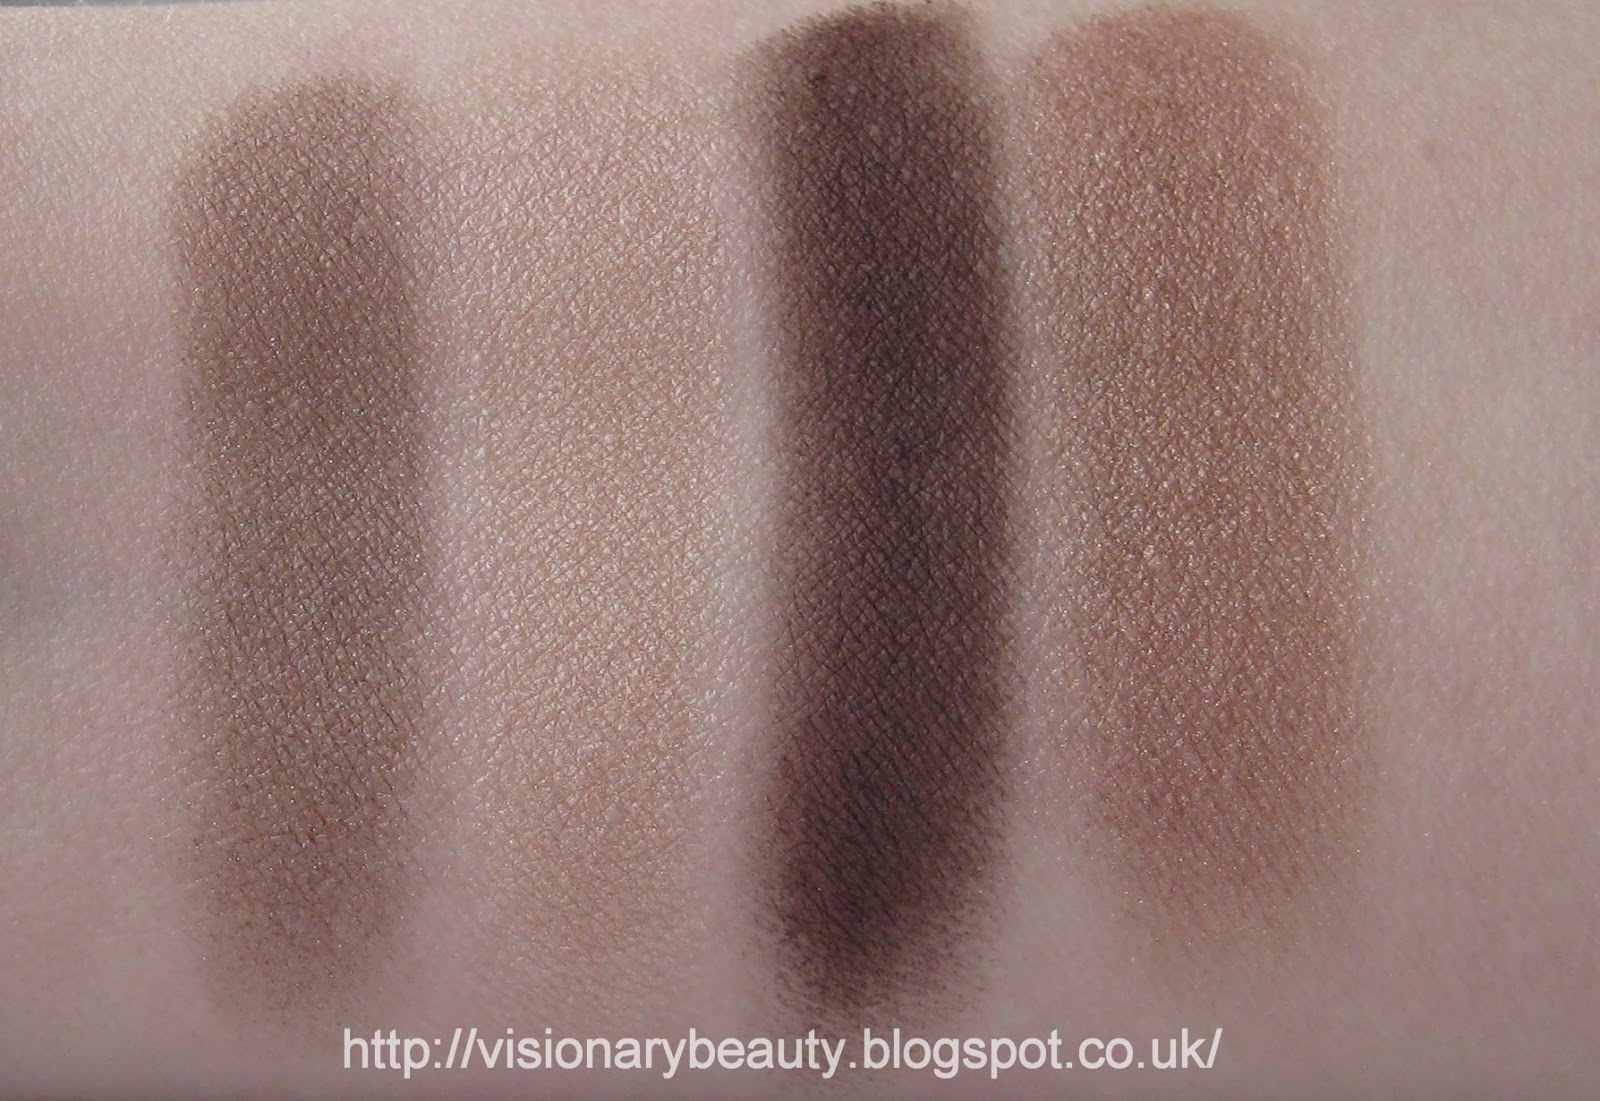 The Beauty Look Book - Page 264 of 375 - Beauty Blog, Reviews + Makeup Looks